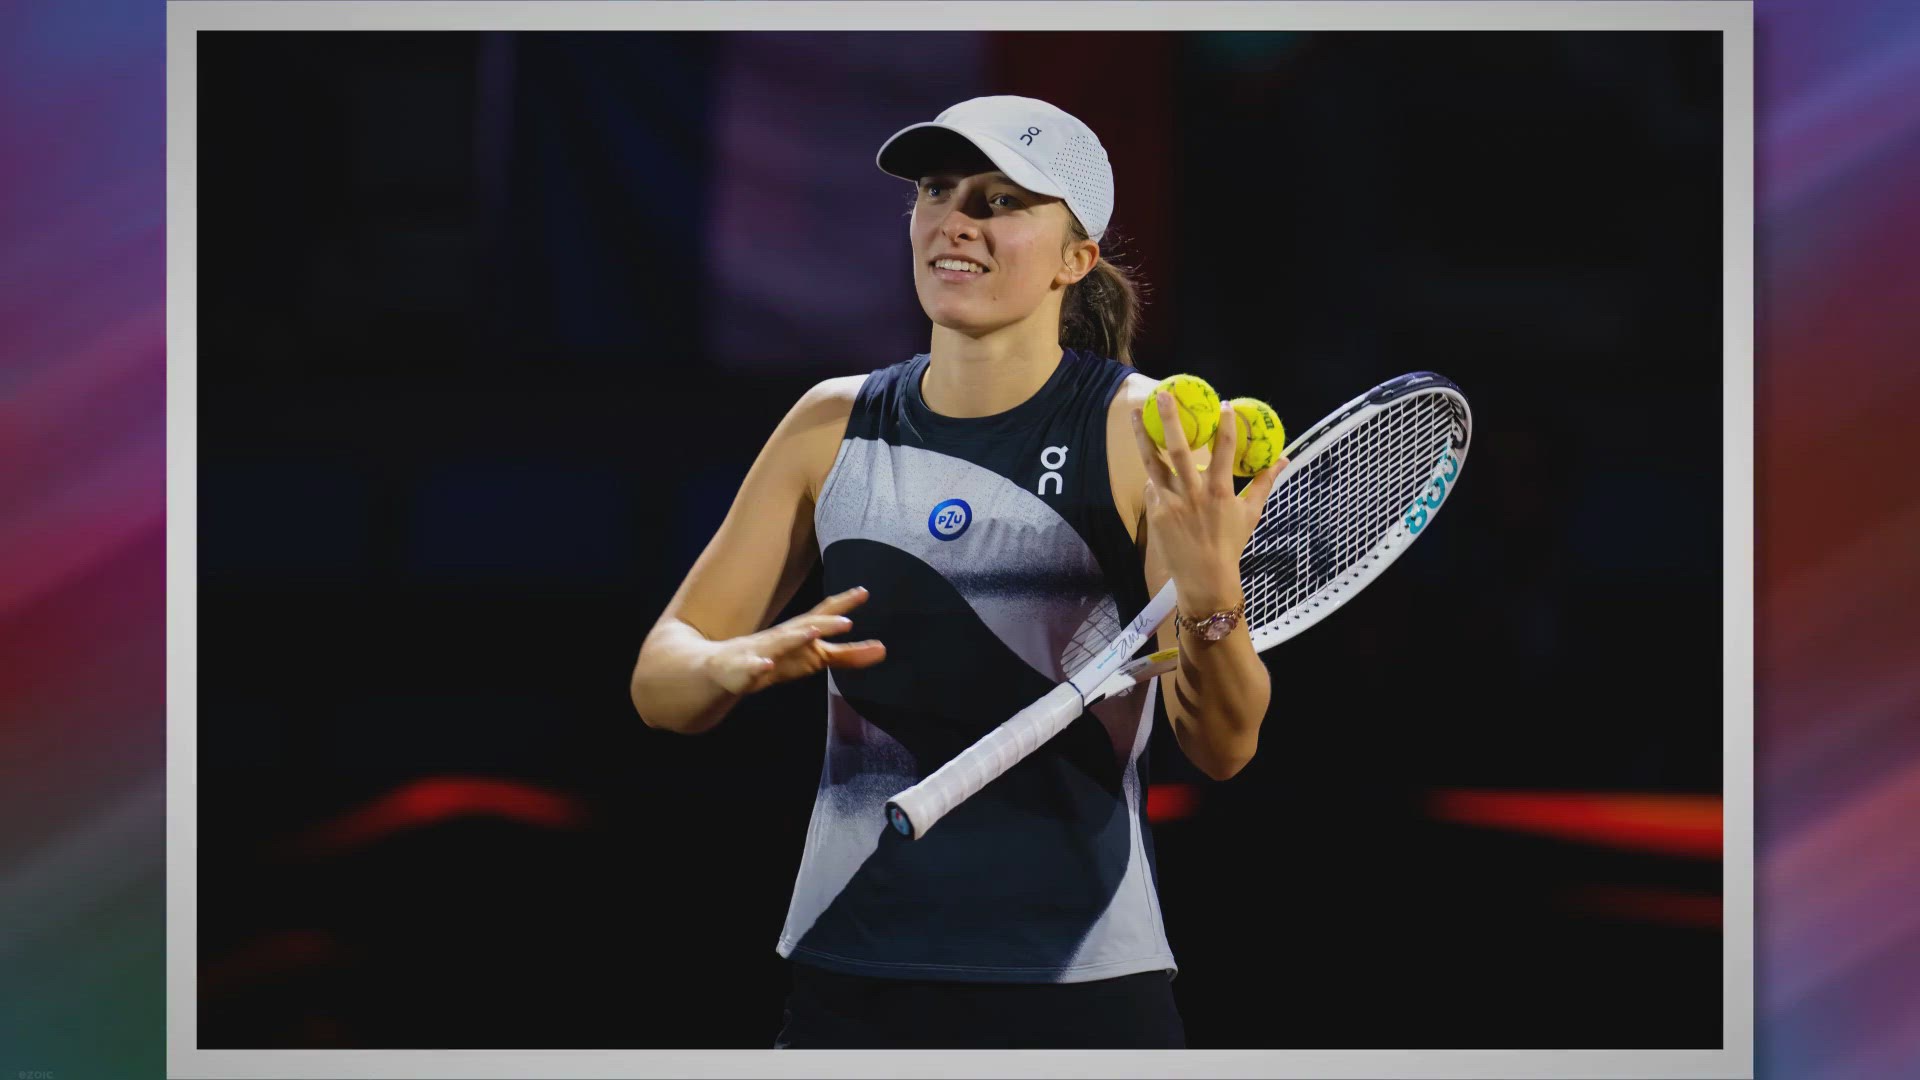 New tennis fashion era started today in Stuttgart WTA No.1 Iga Swiatek played her first match in On apparel